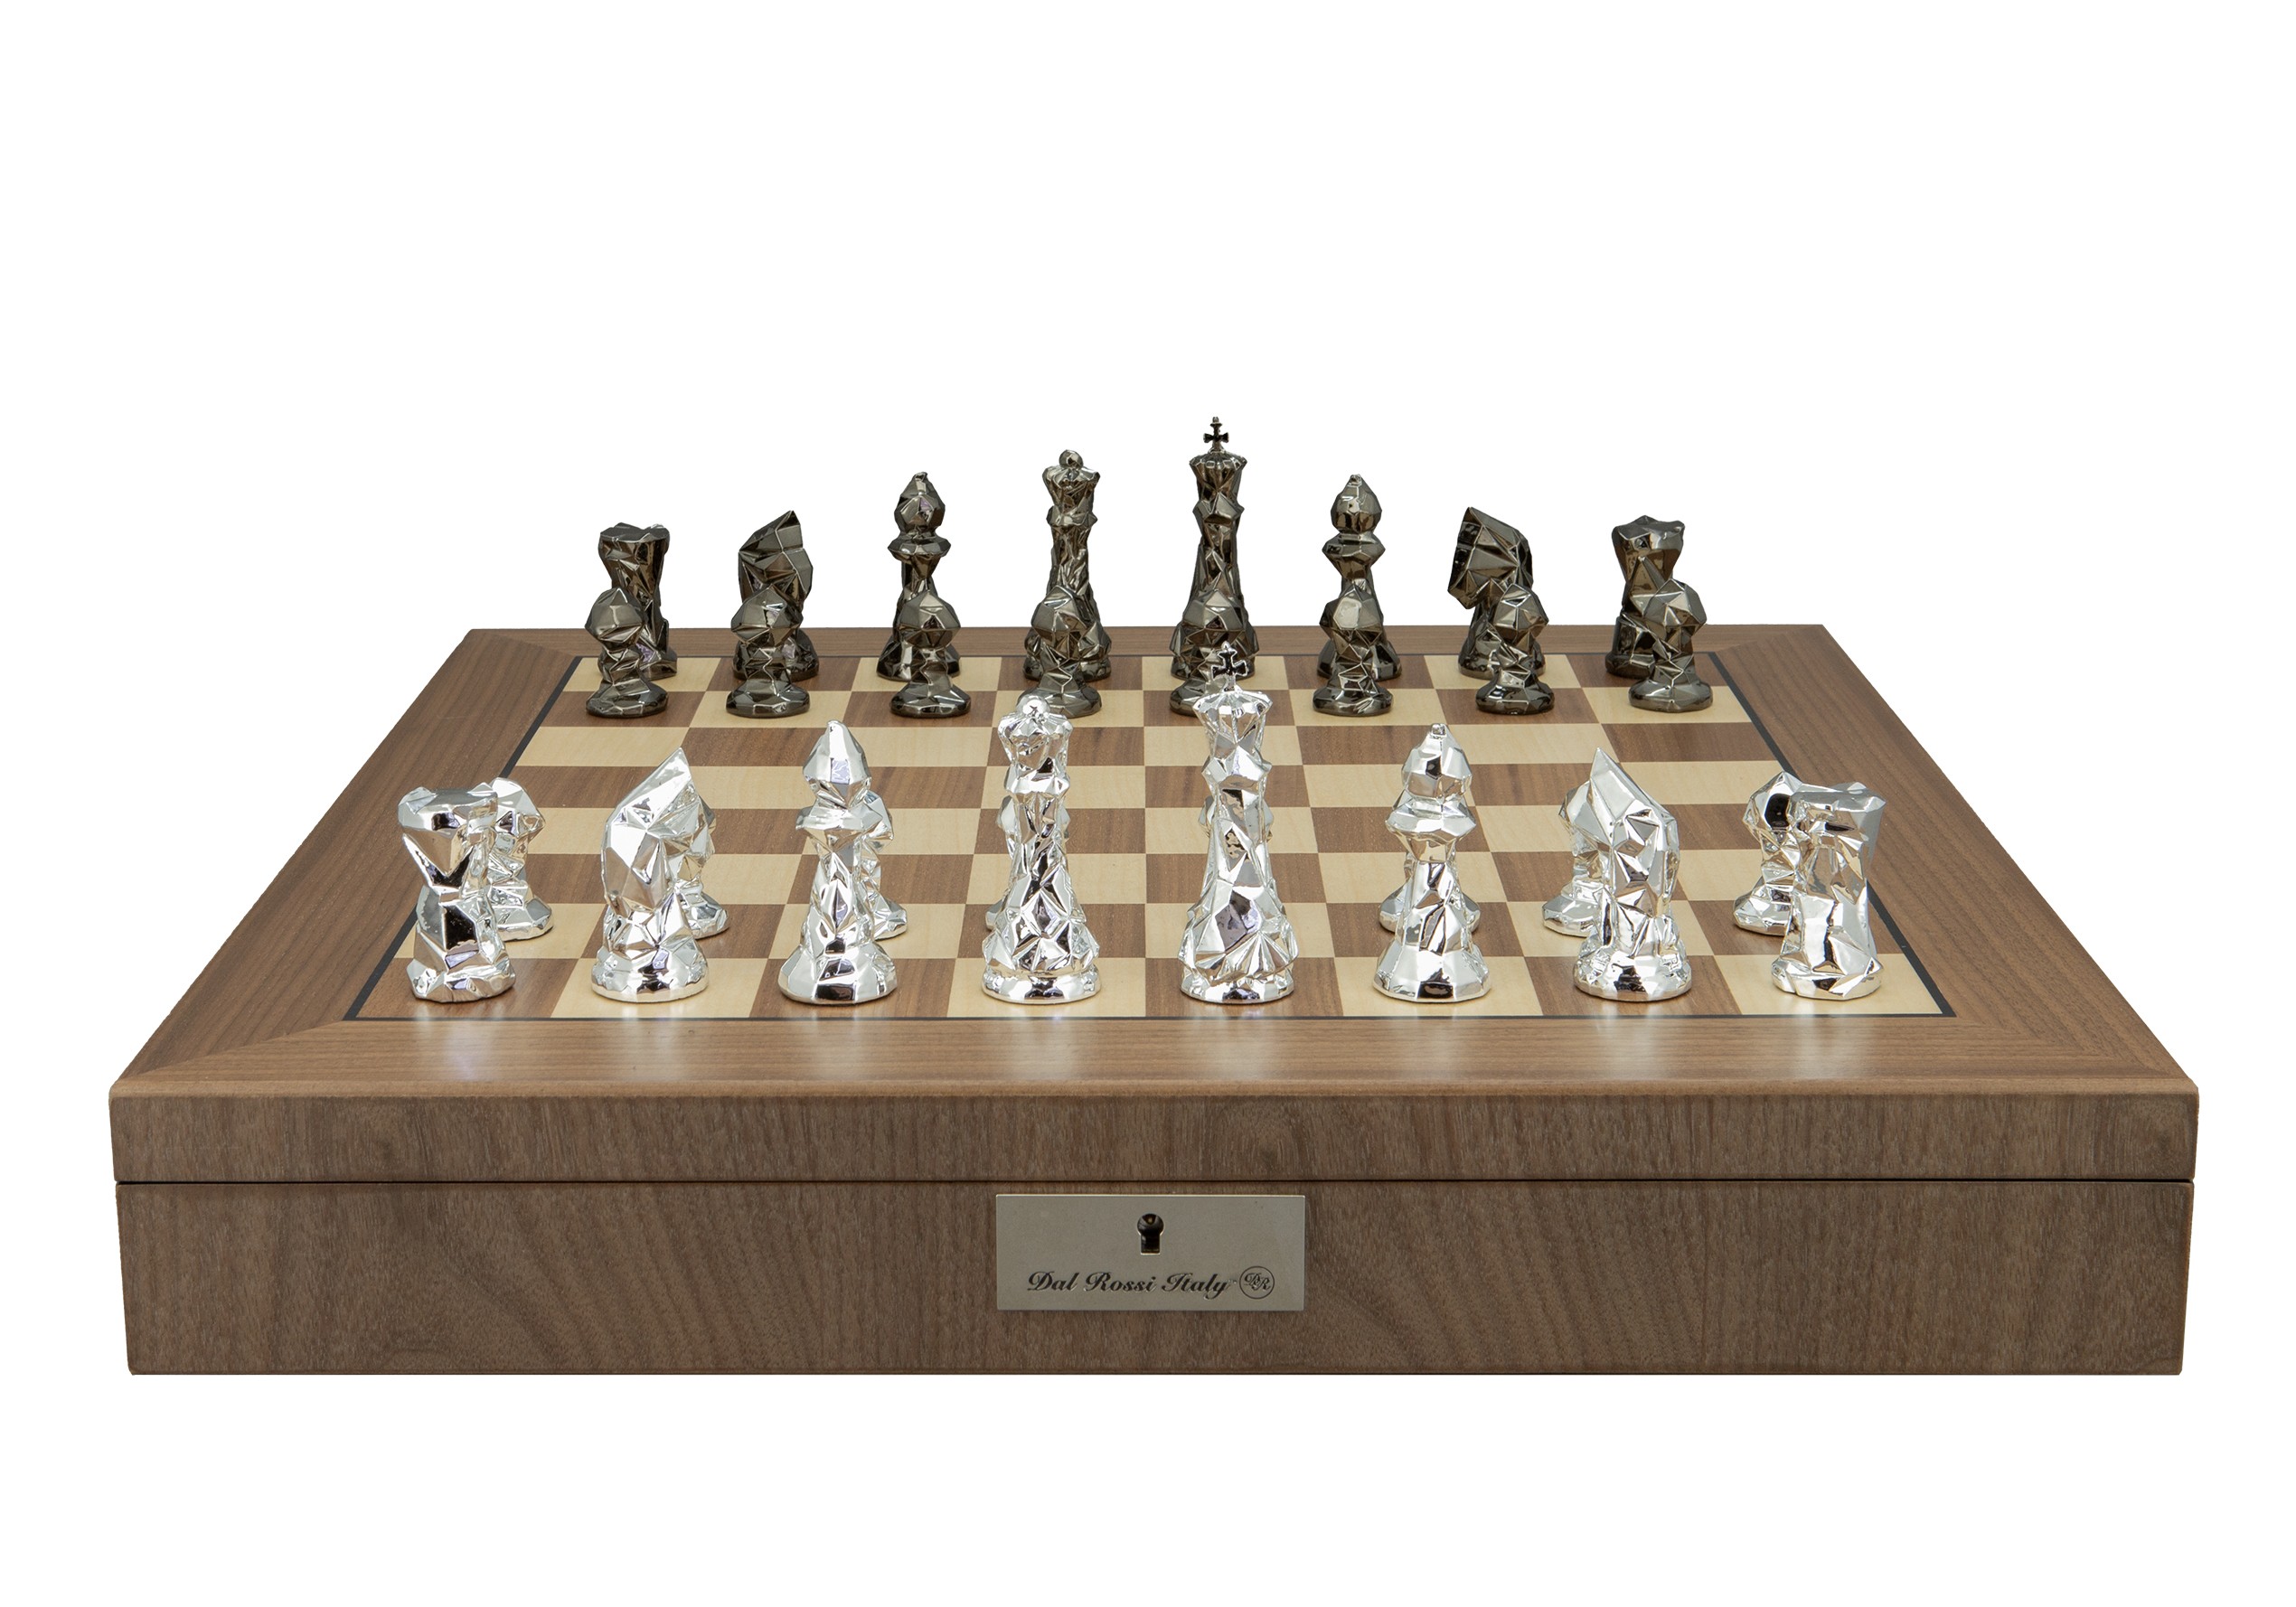  Dal Rossi Diamond-Cut Titanium & Silver Chessmen on a Walnut Inlaid Chess Box with Compartments 20"